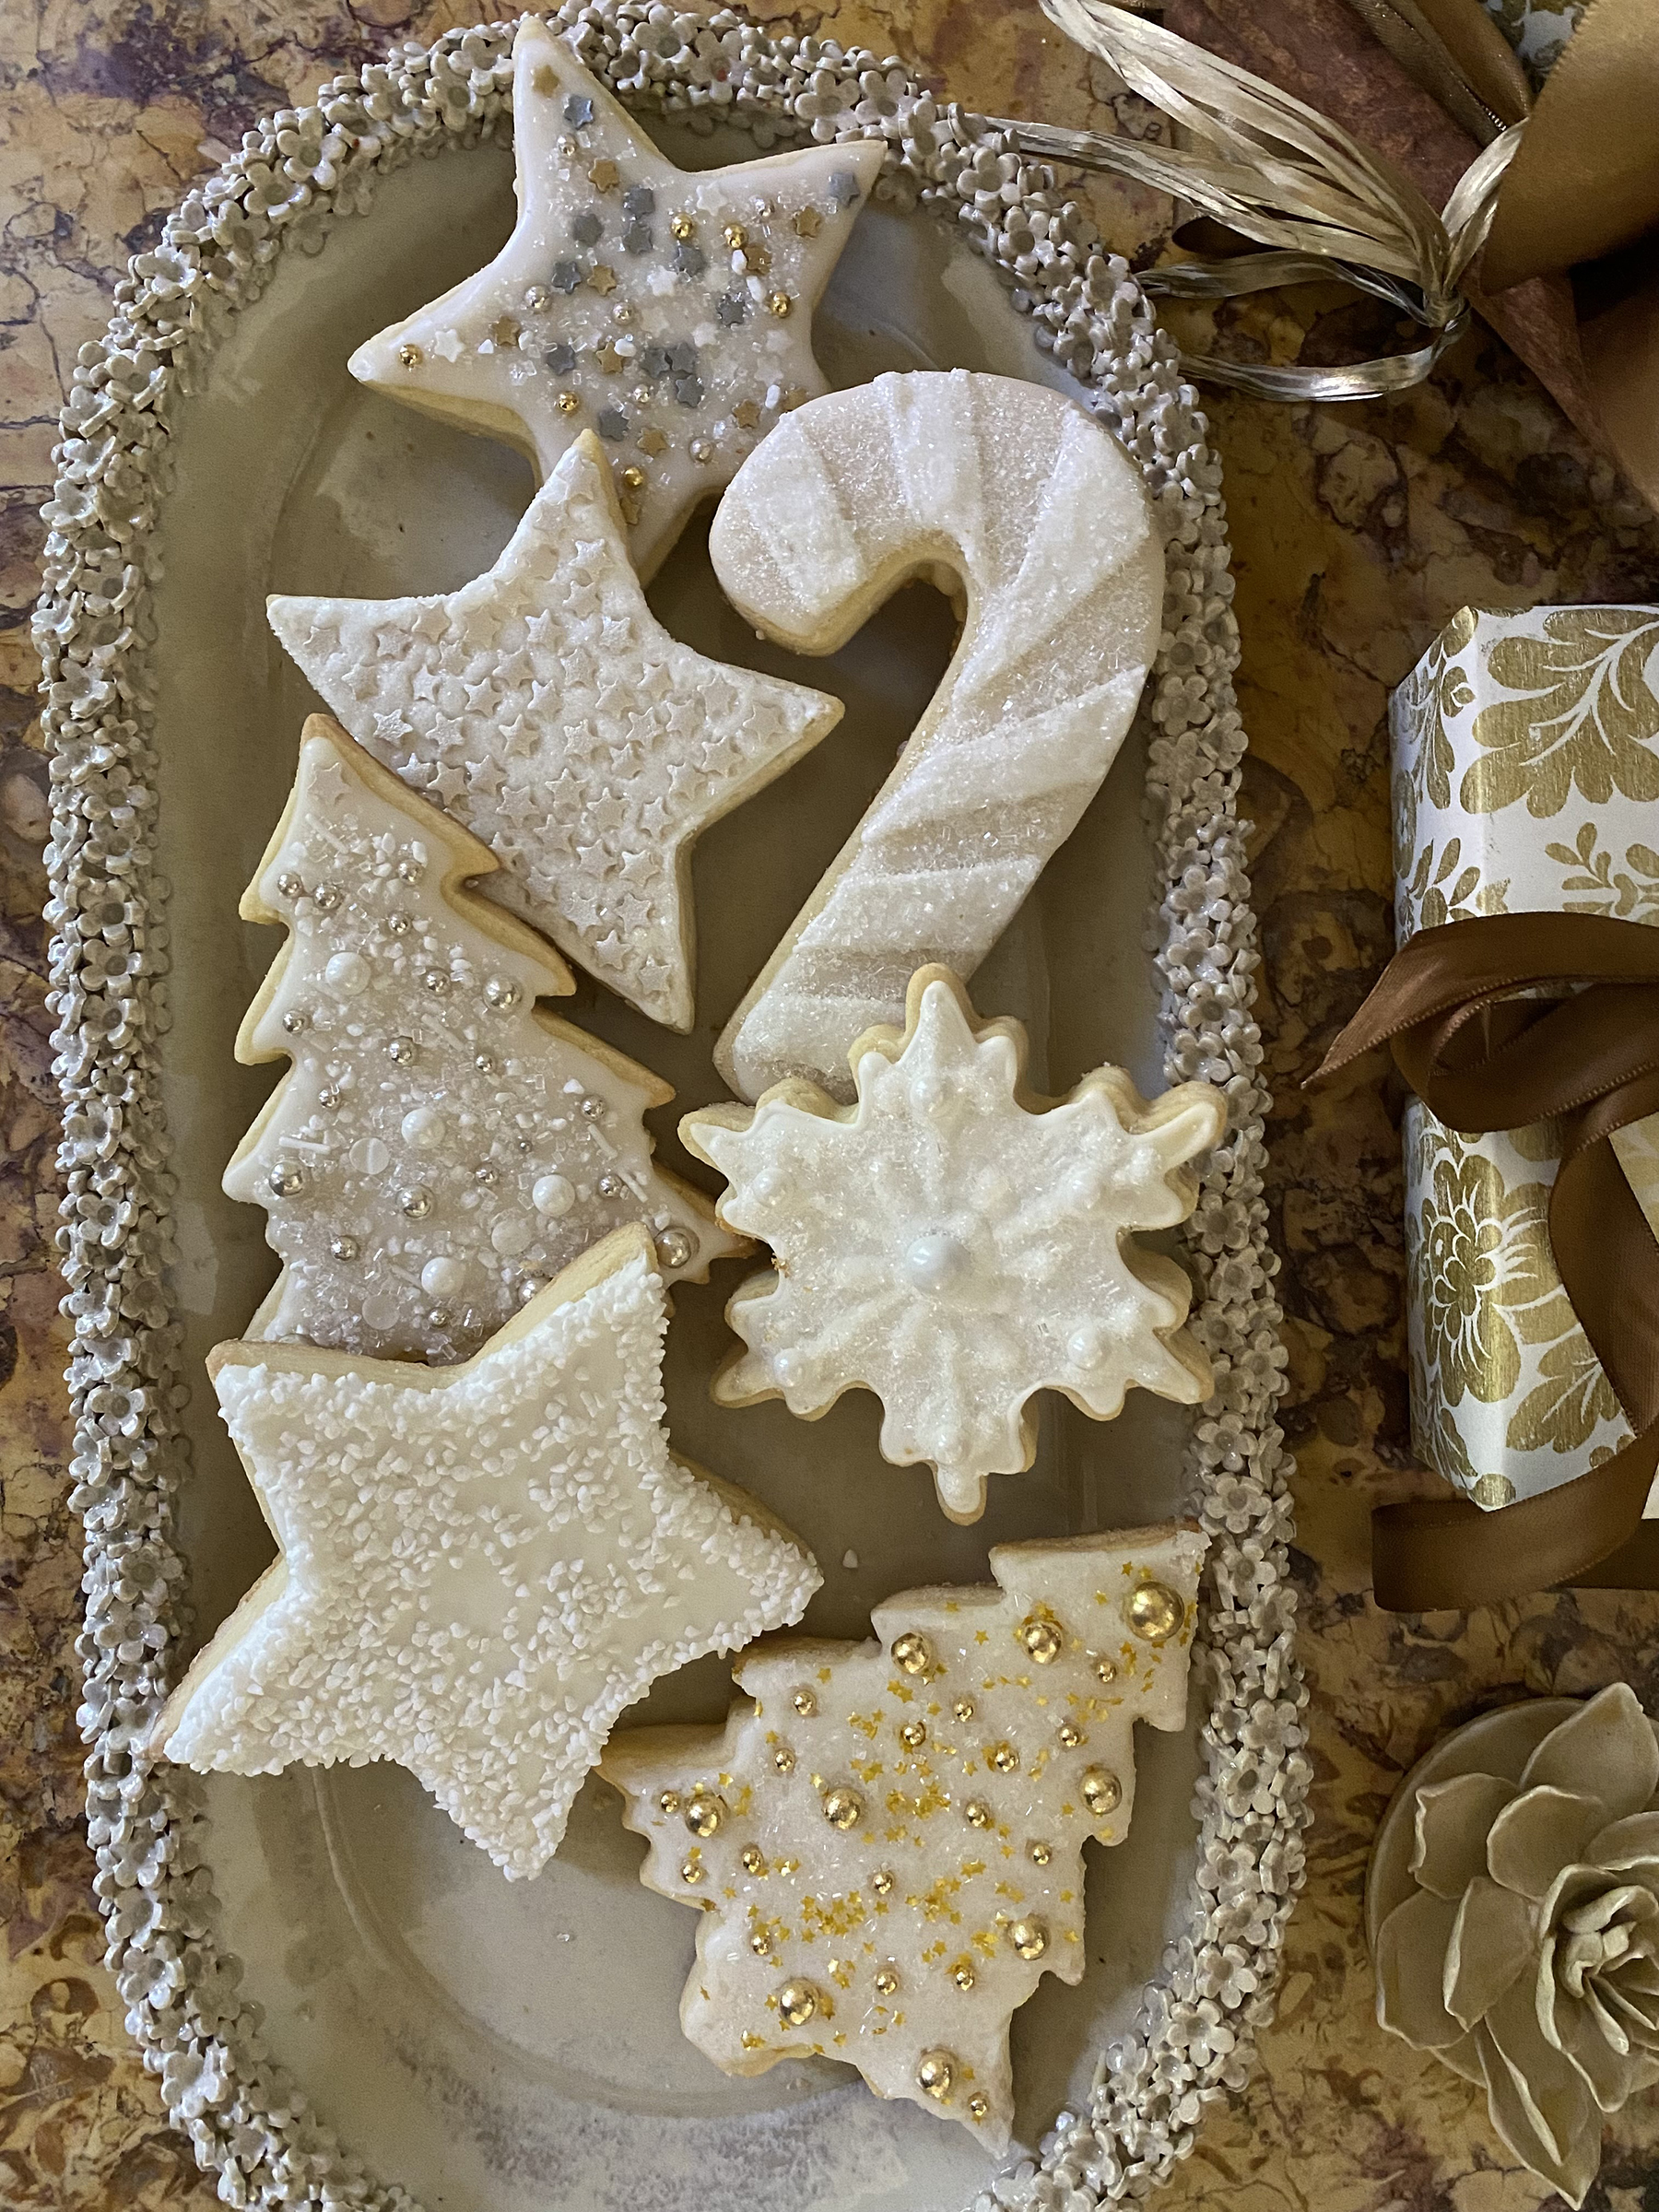 Tray of white decorated sugar cookies.